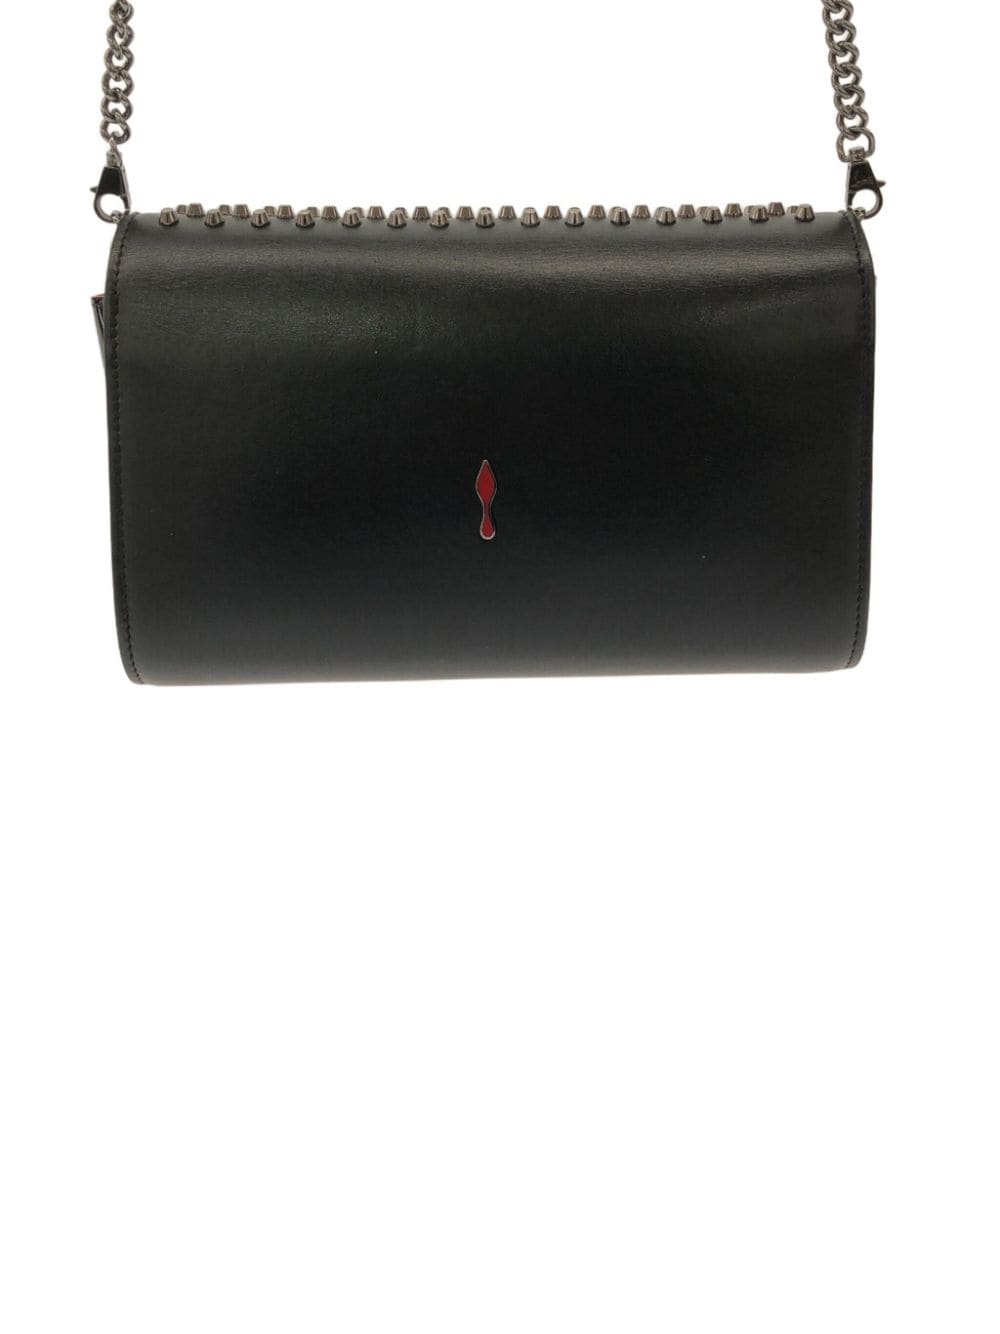 Christian Louboutin Pre-Owned 2020-2023 Studded Leather Paloma Clutch on Chain crossbody bag - Nero